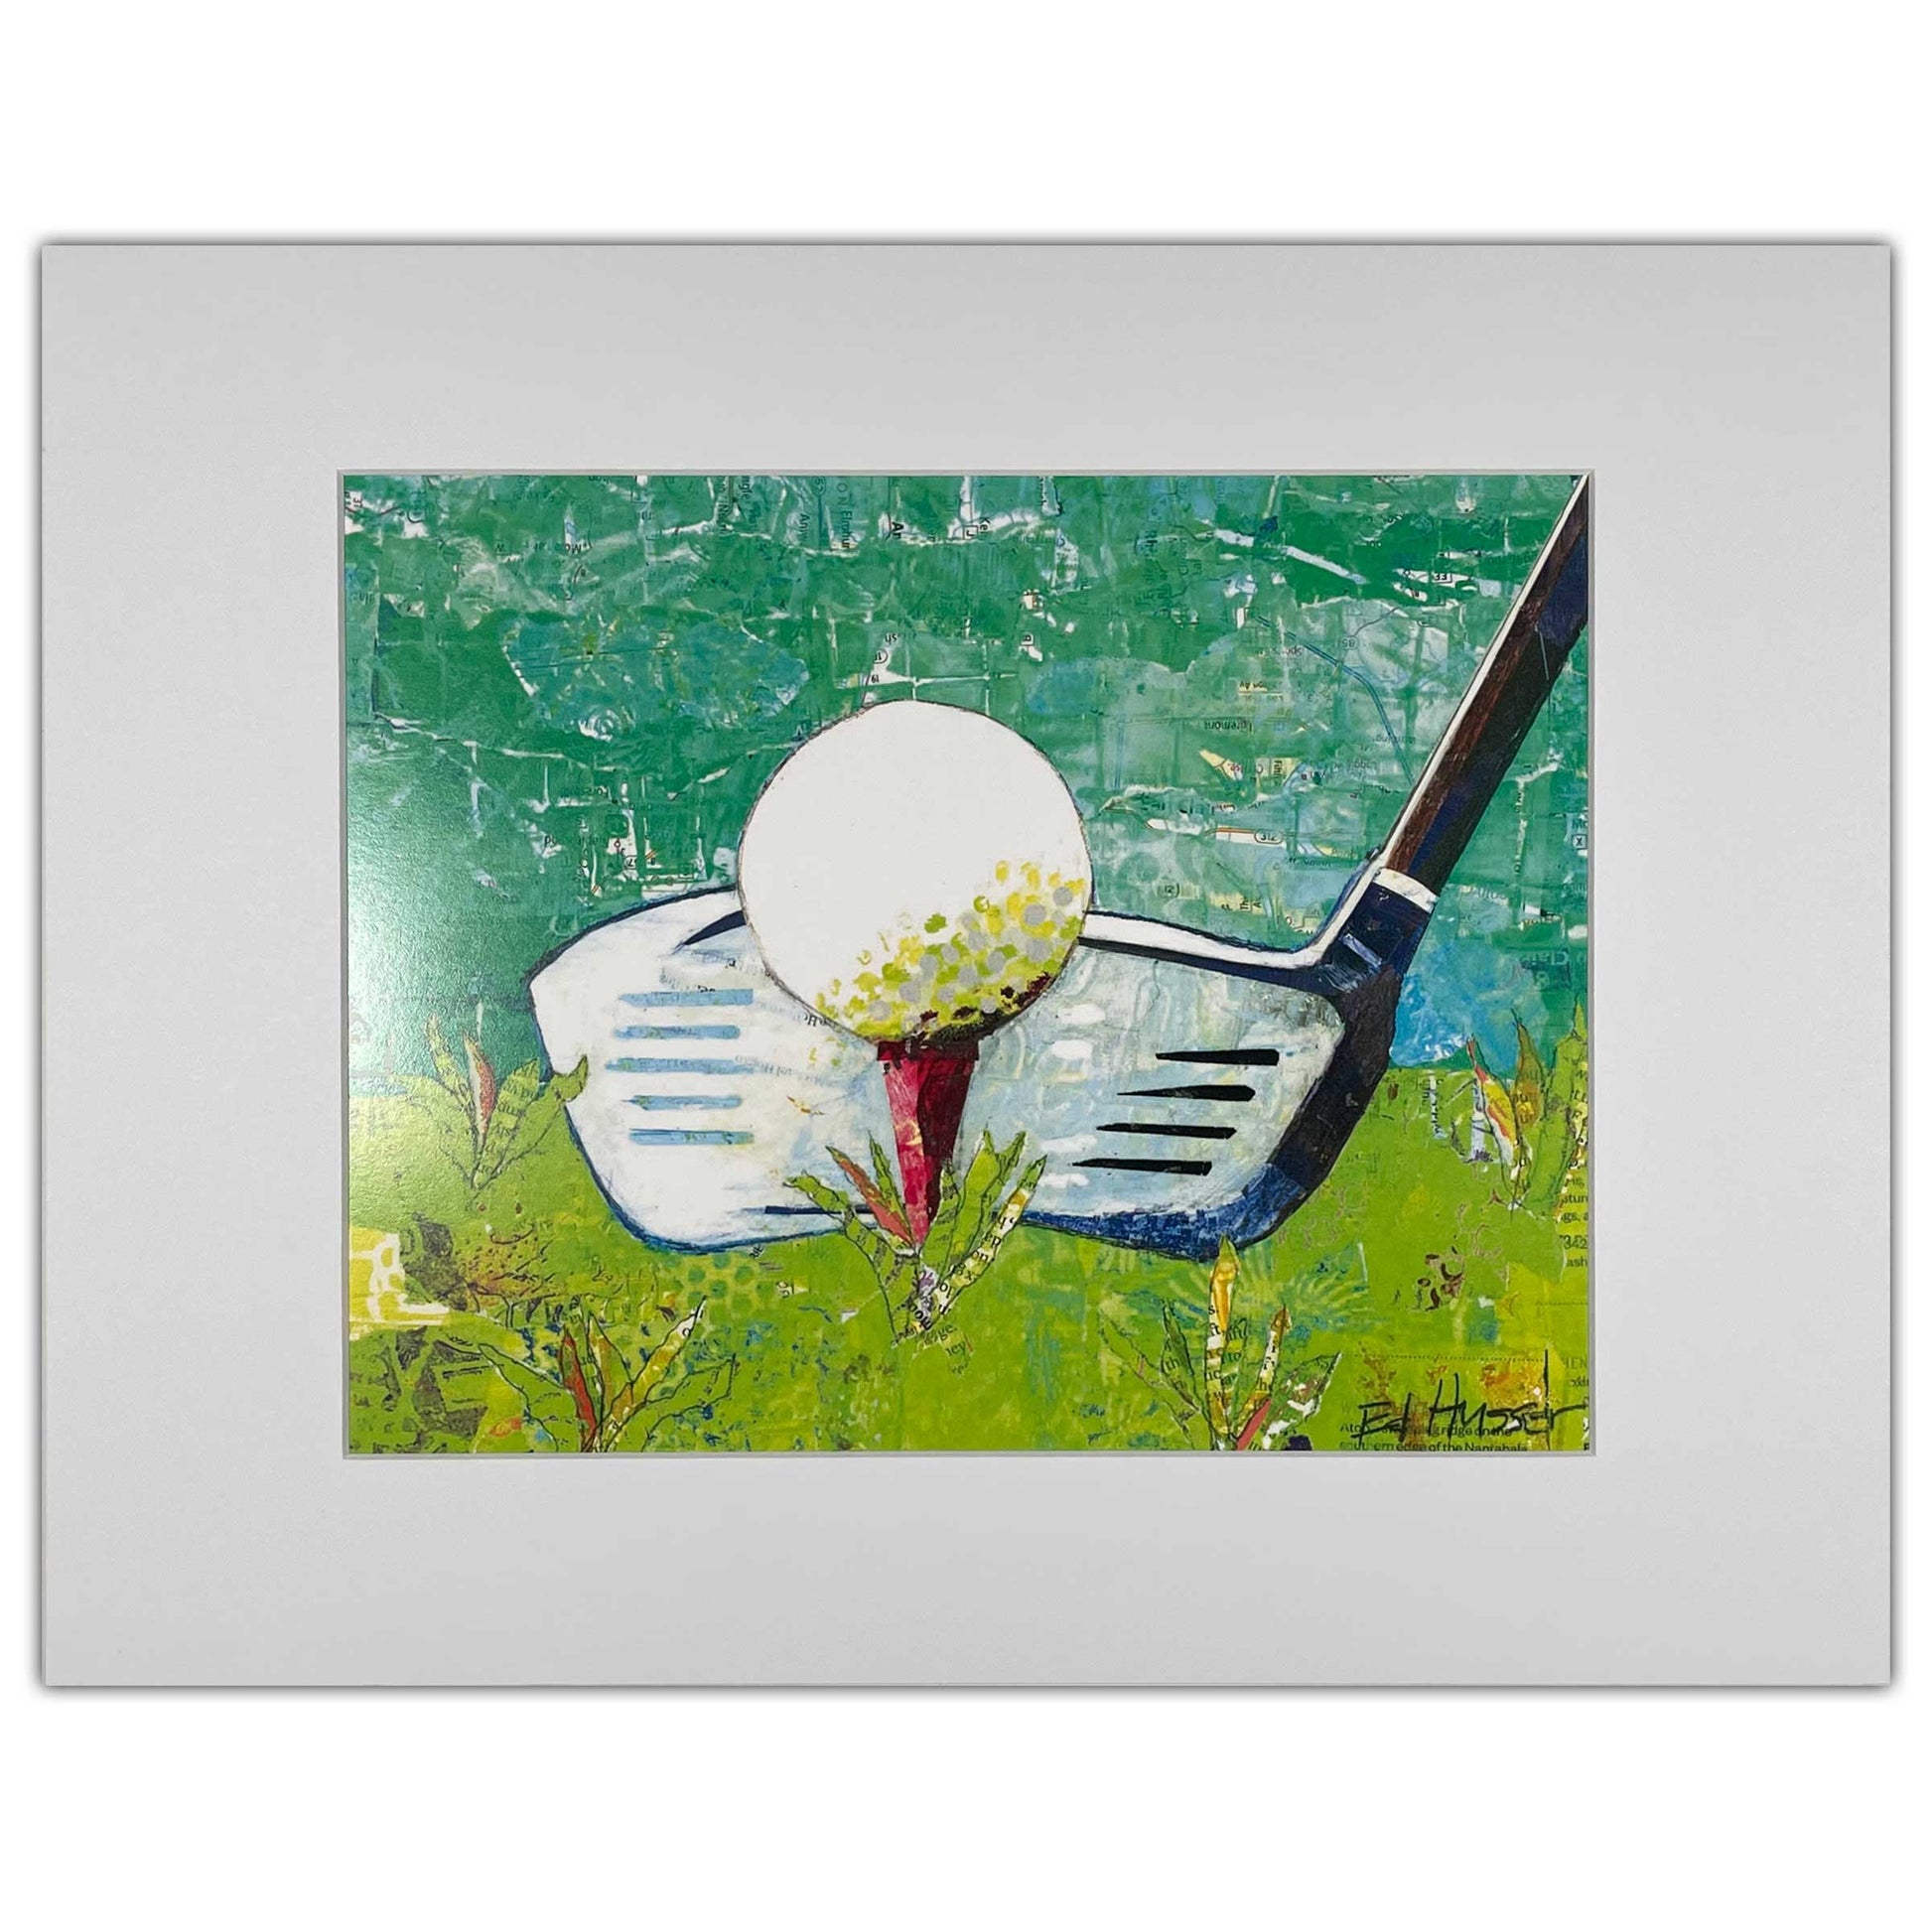 tee time collage print, golf art, golf ball, putter, putting green, paper collage, collage art